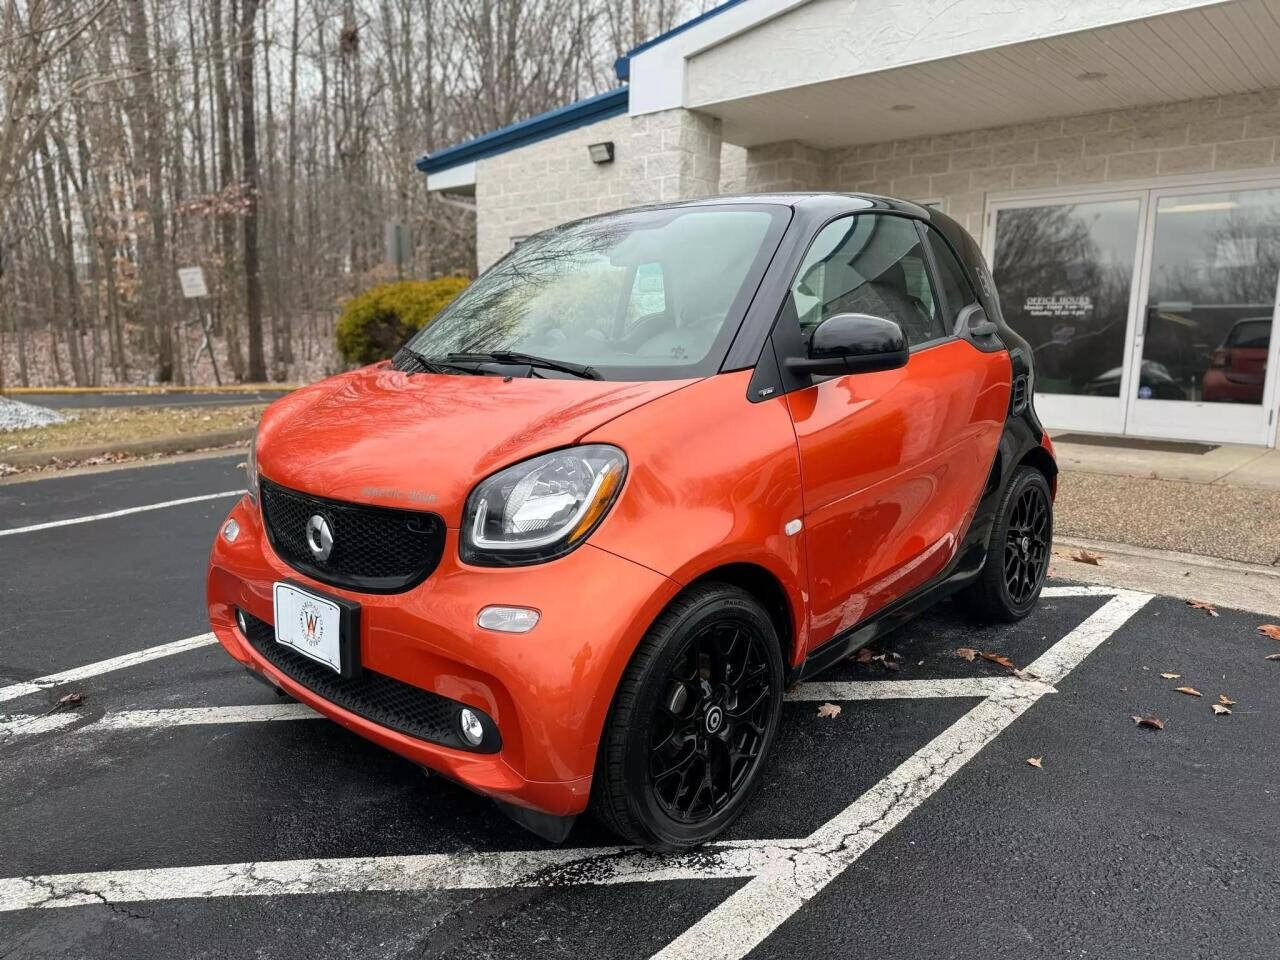 Used 2013 smart fortwo Passion Cabriolet 2D Prices